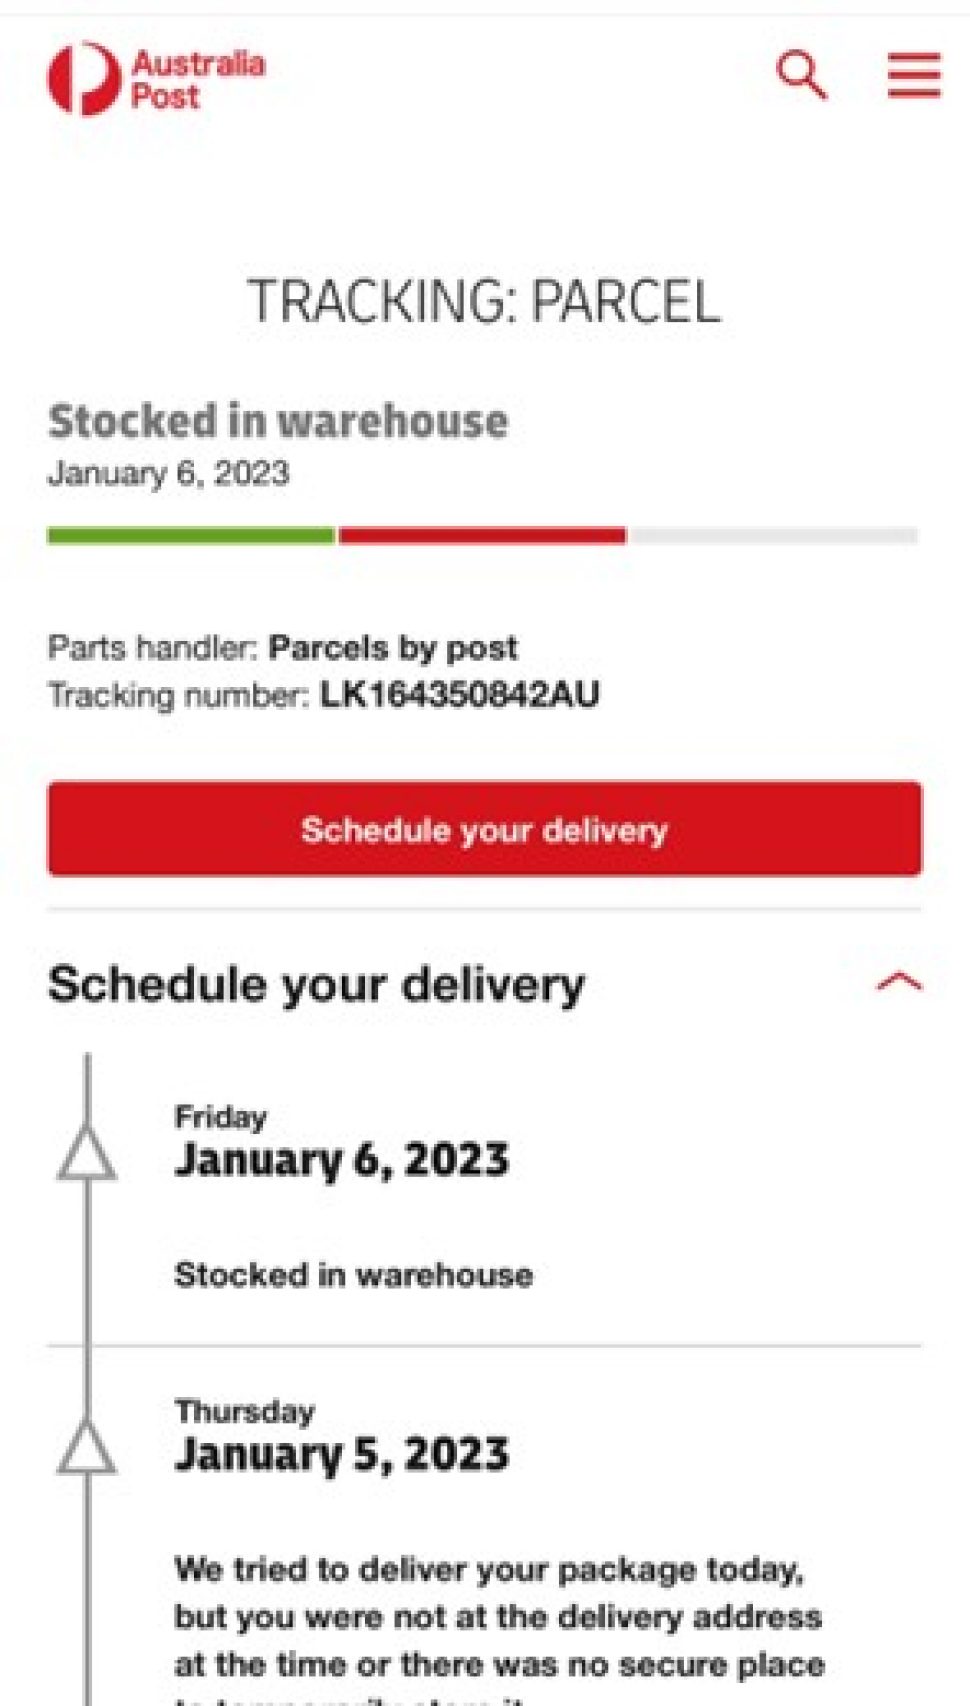 The webpage is shown with an Australia Post logo on it.
The title is TRACKING: PARCEL.
The parcel status shows stocked in warehouse and the parts handler is Parcels by post. The tracking number is LK164350842AU. The webpage shows the timeline of the delivery. And there is a red button shows “Schedule your delivery”.